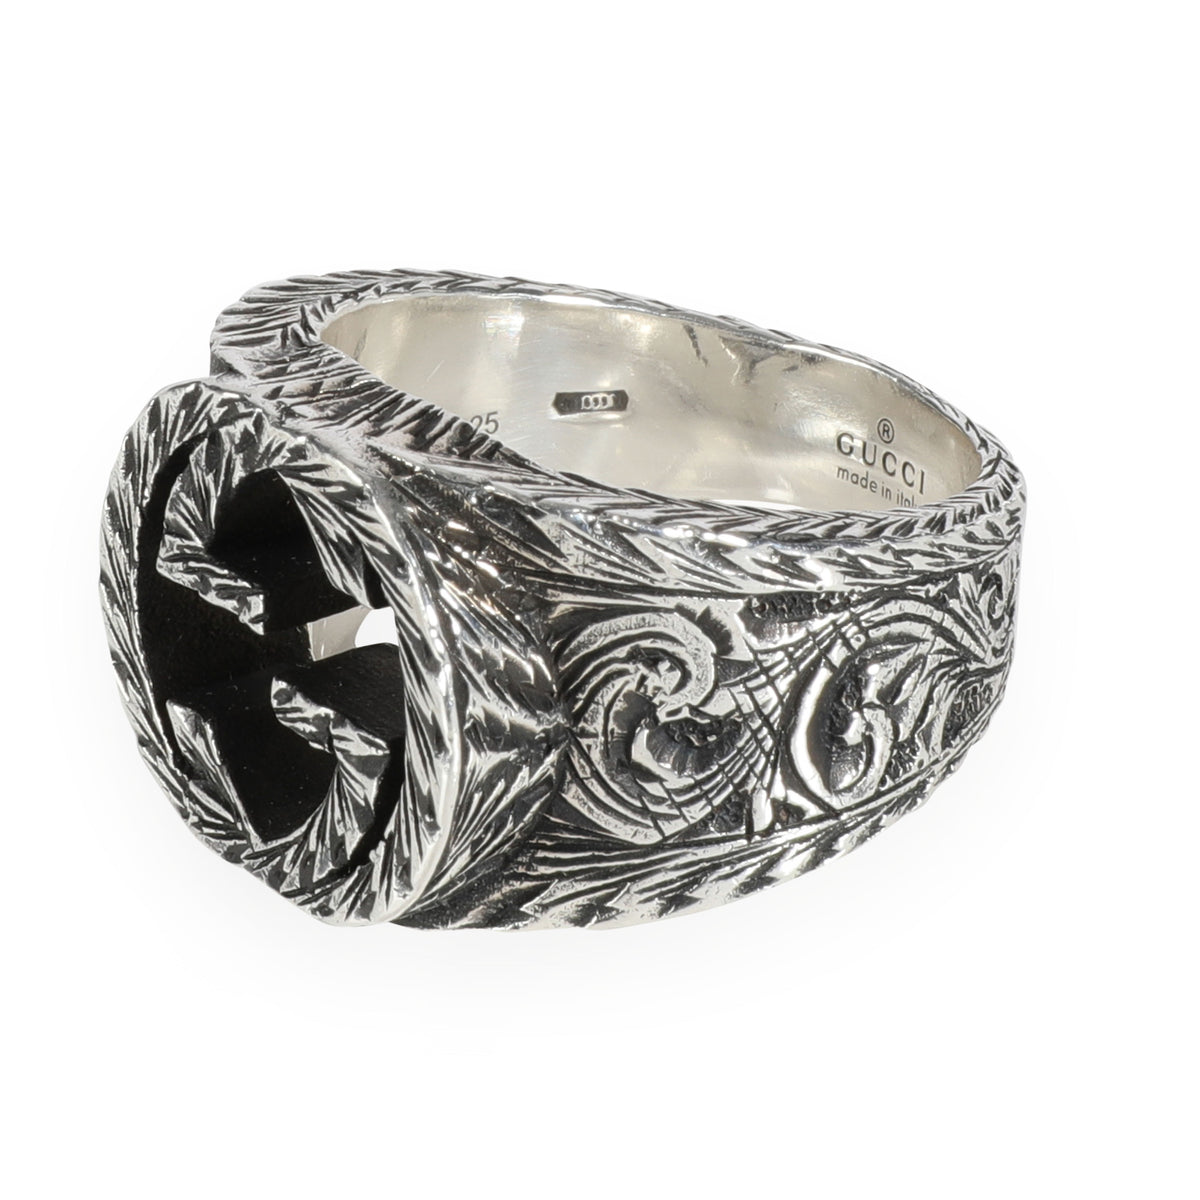 Gucci Interlocking G Ring with Engraved Pattern in Sterling Silver